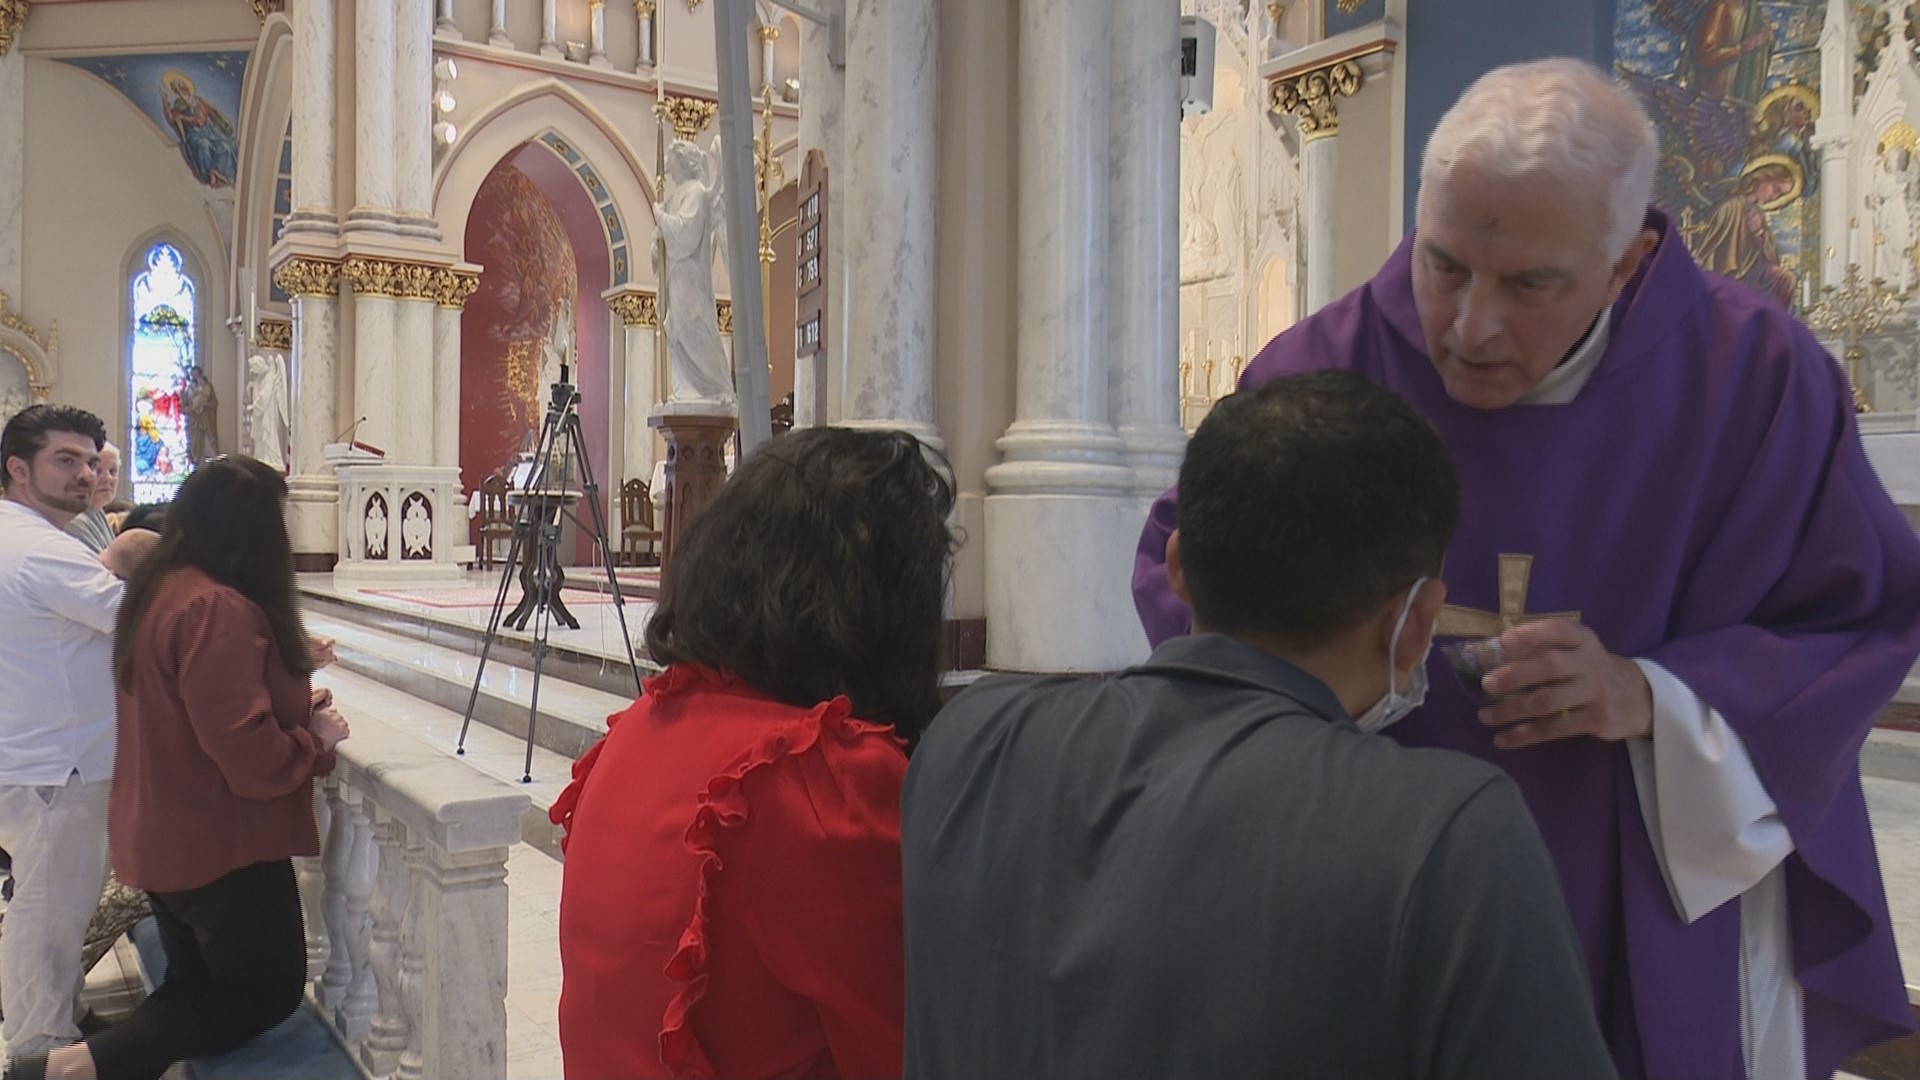 The season of Lent is here and churches are inviting everyone to prepare for Easter.